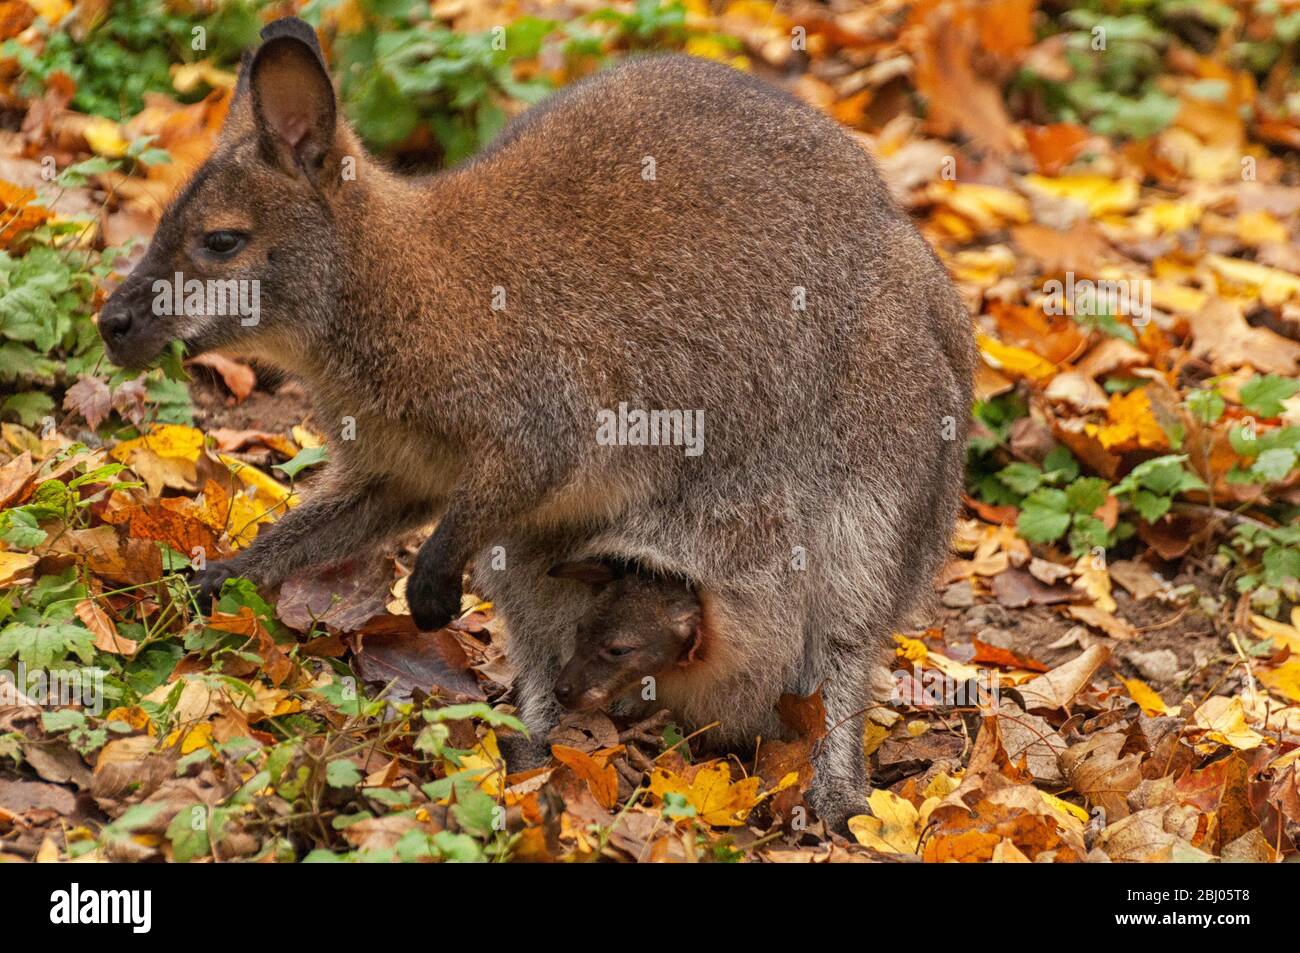 A kangaroo with a baby in a pouch Stock Photo